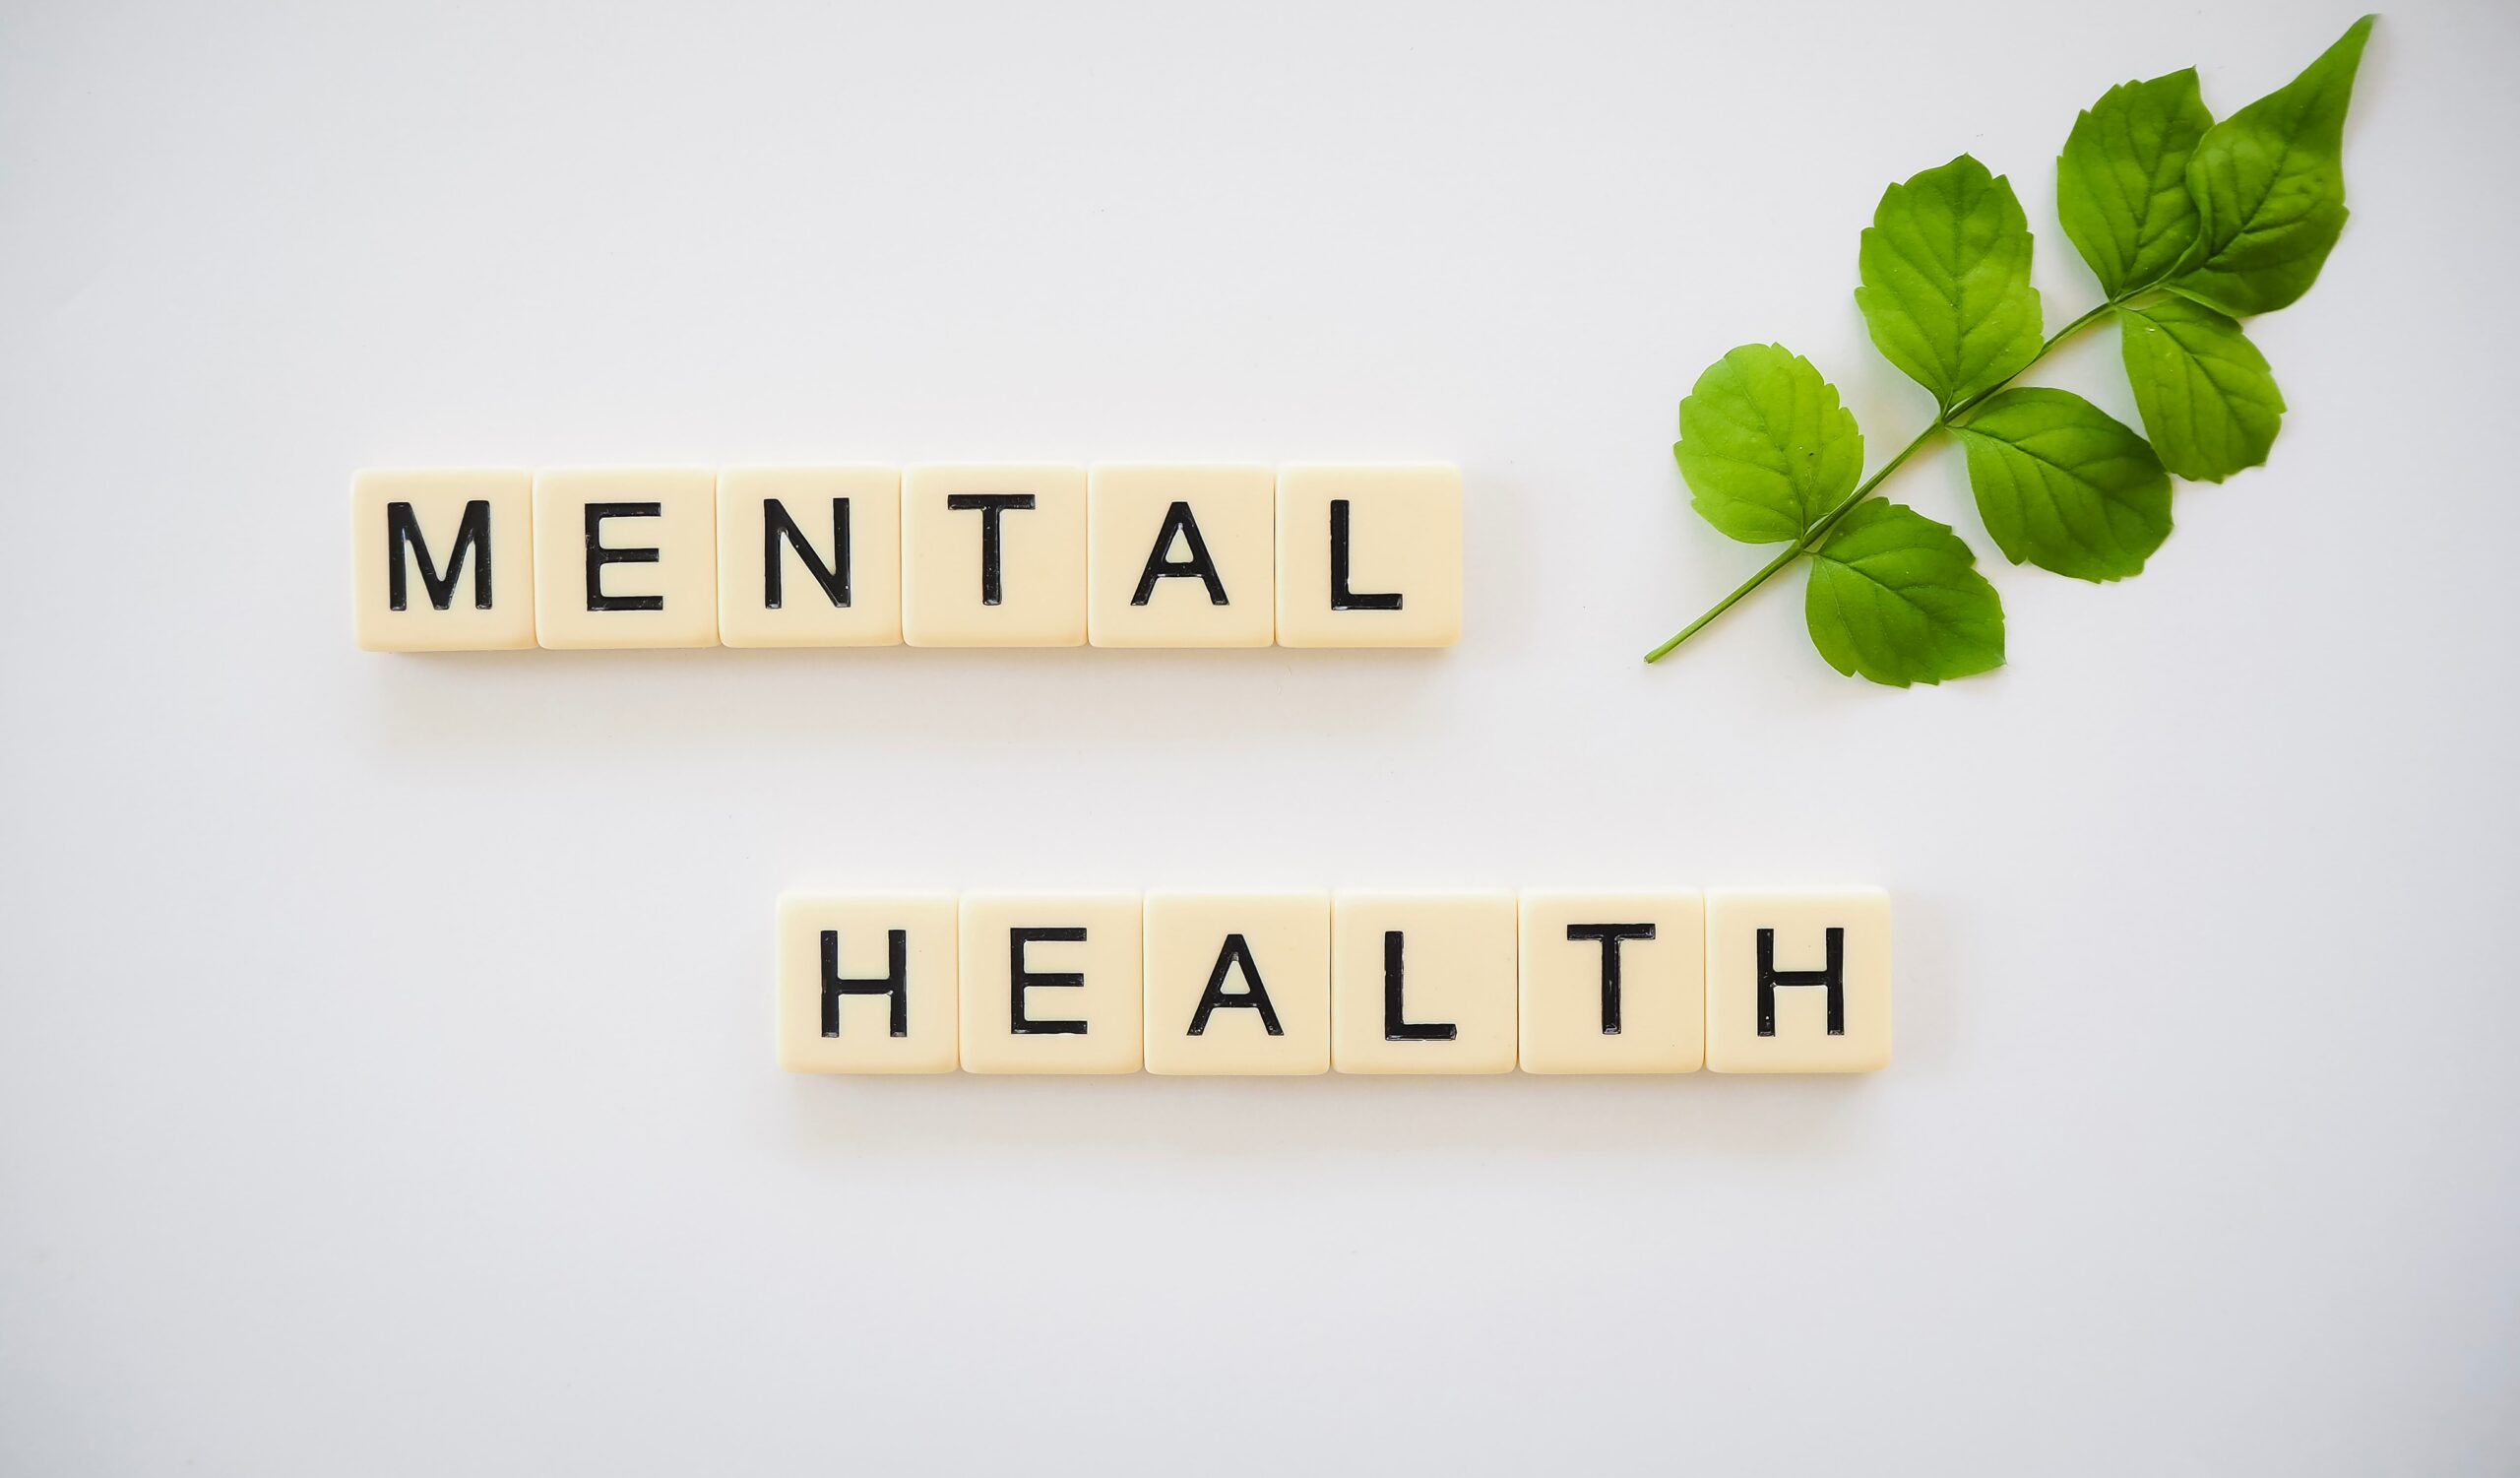 How HR service solutions can help you prioritise mental health in the workplace